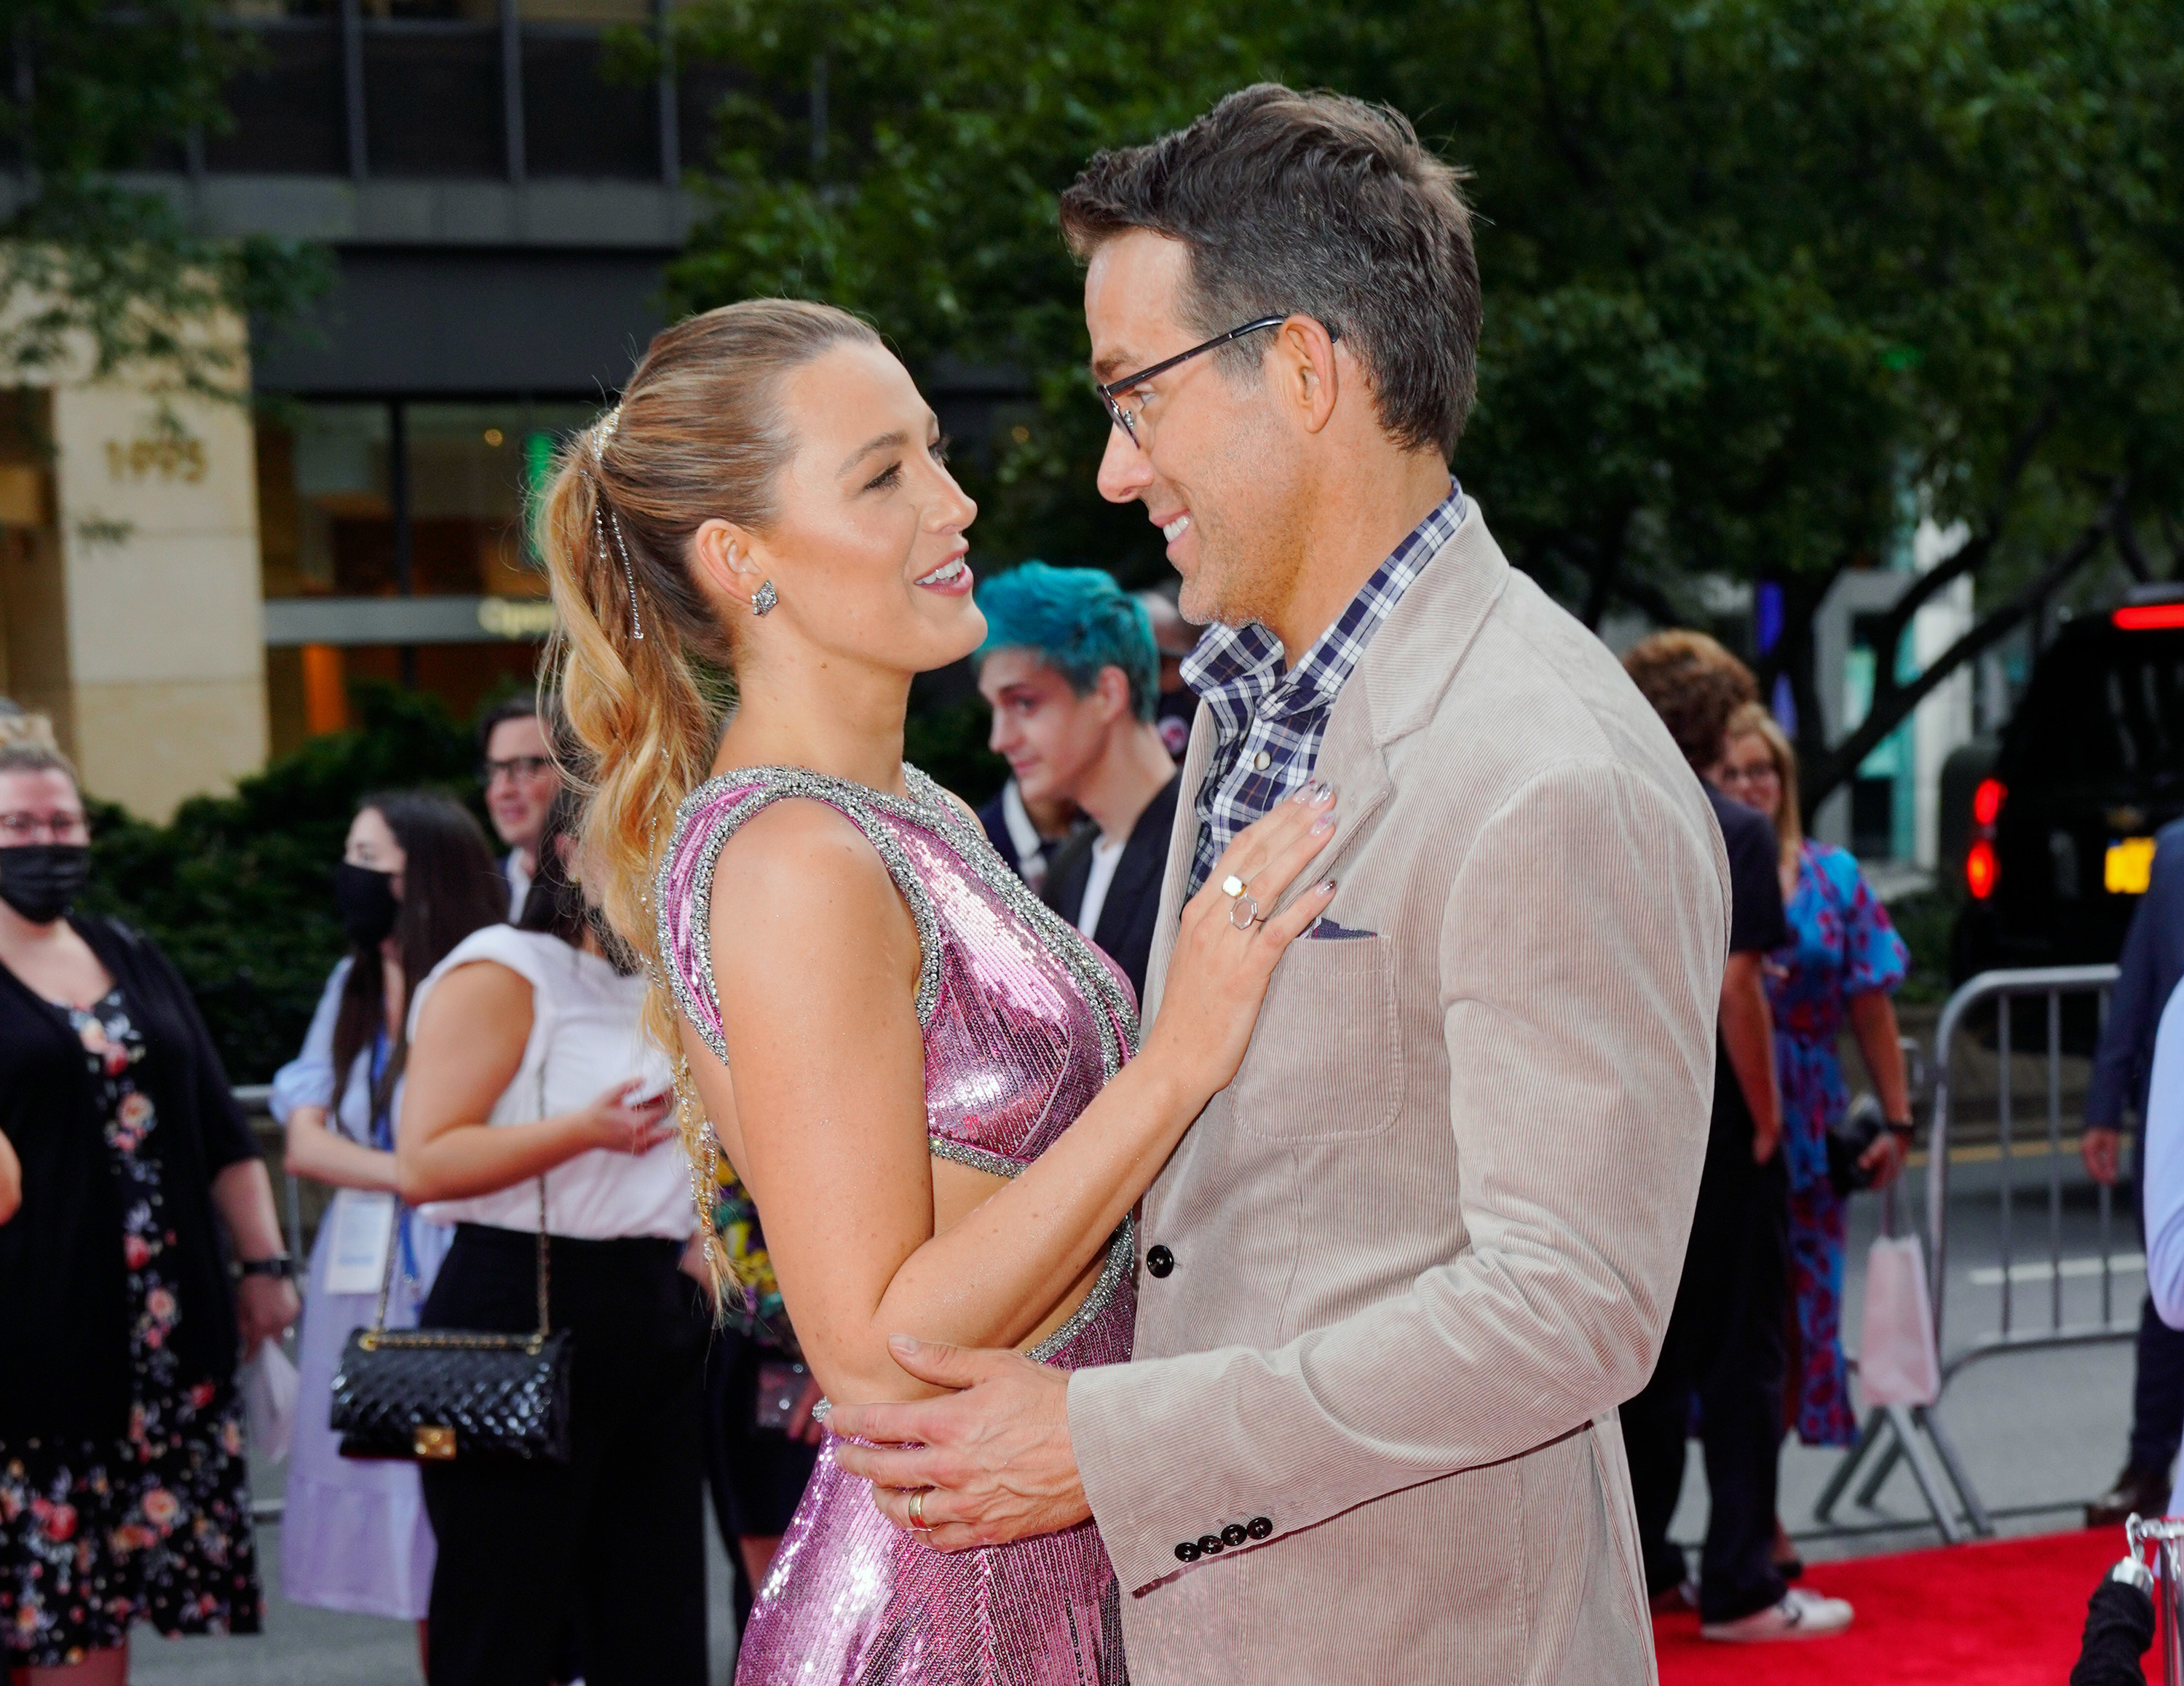 Blake Lively and Ryan Reynolds are photographed at the premiere